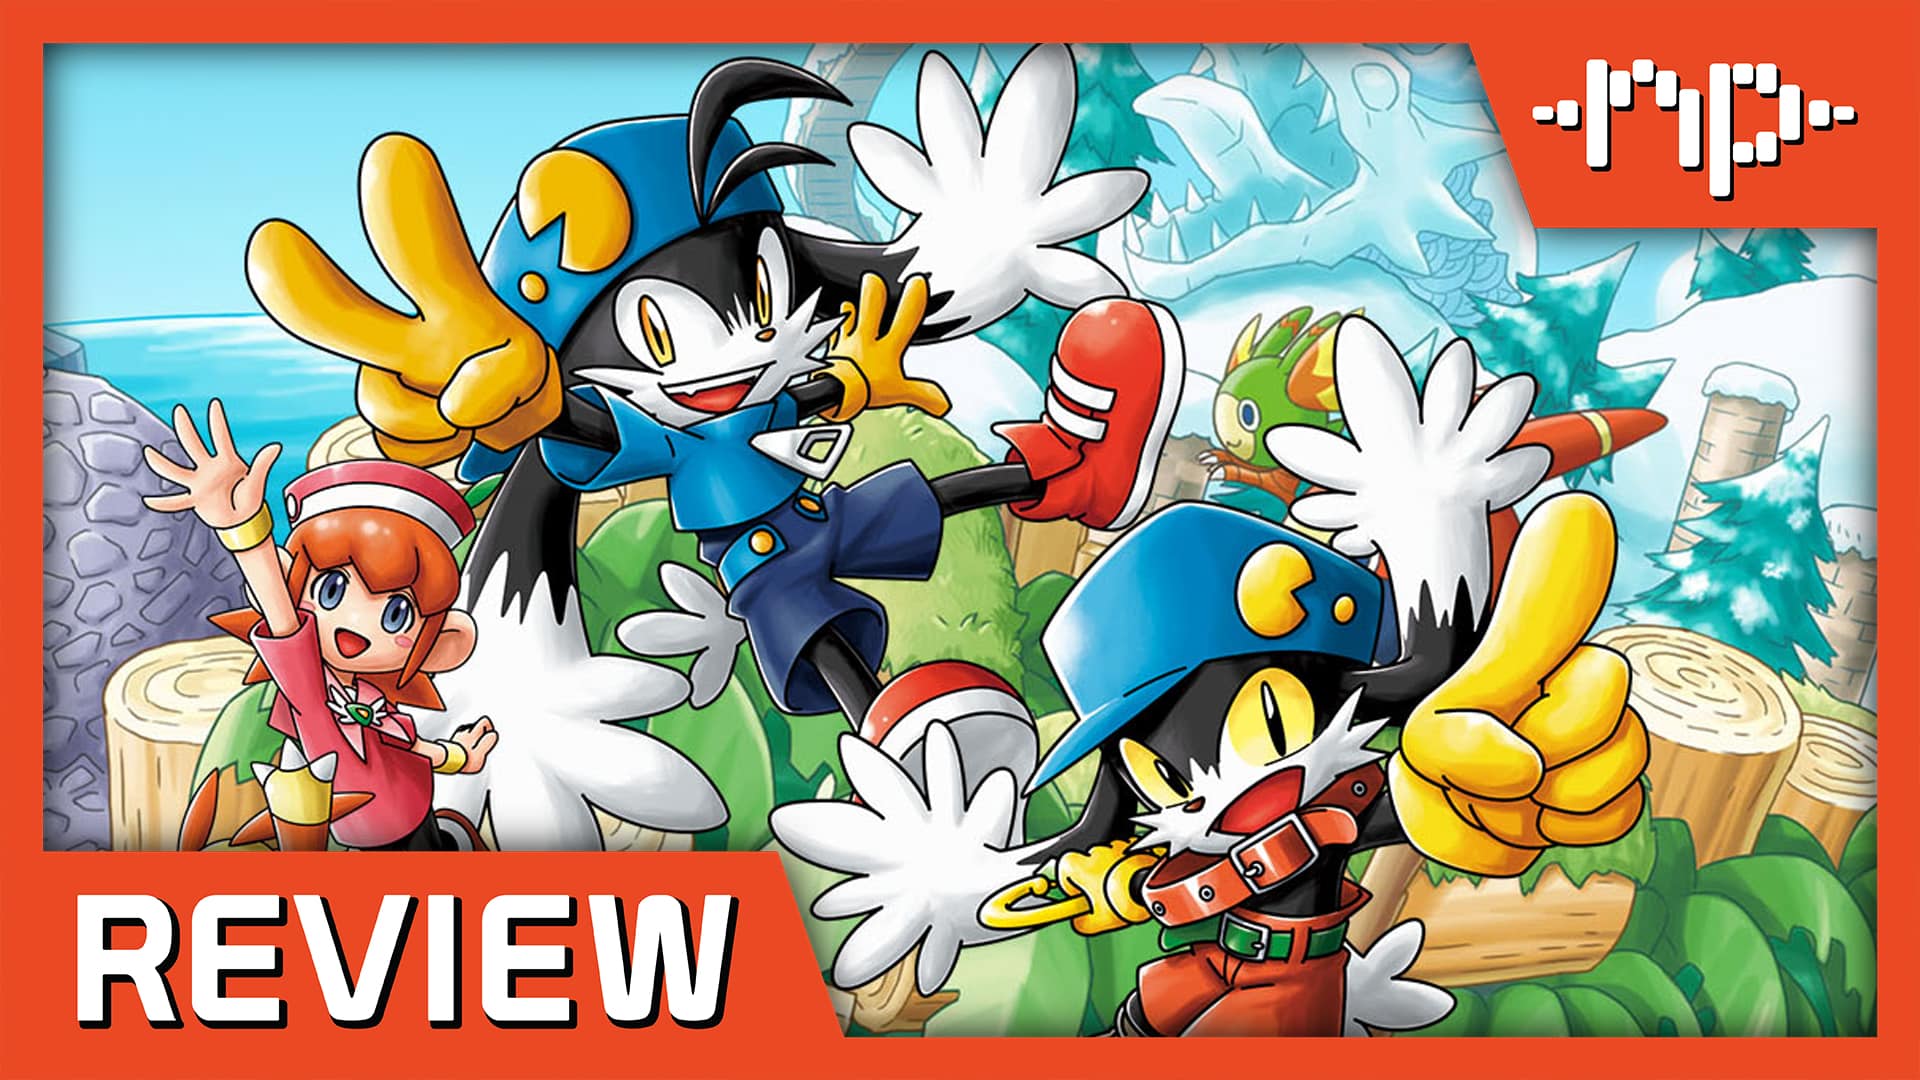 Klonoa Phantasy Reverie Series Review – Consume The Darkness, Return It To Light